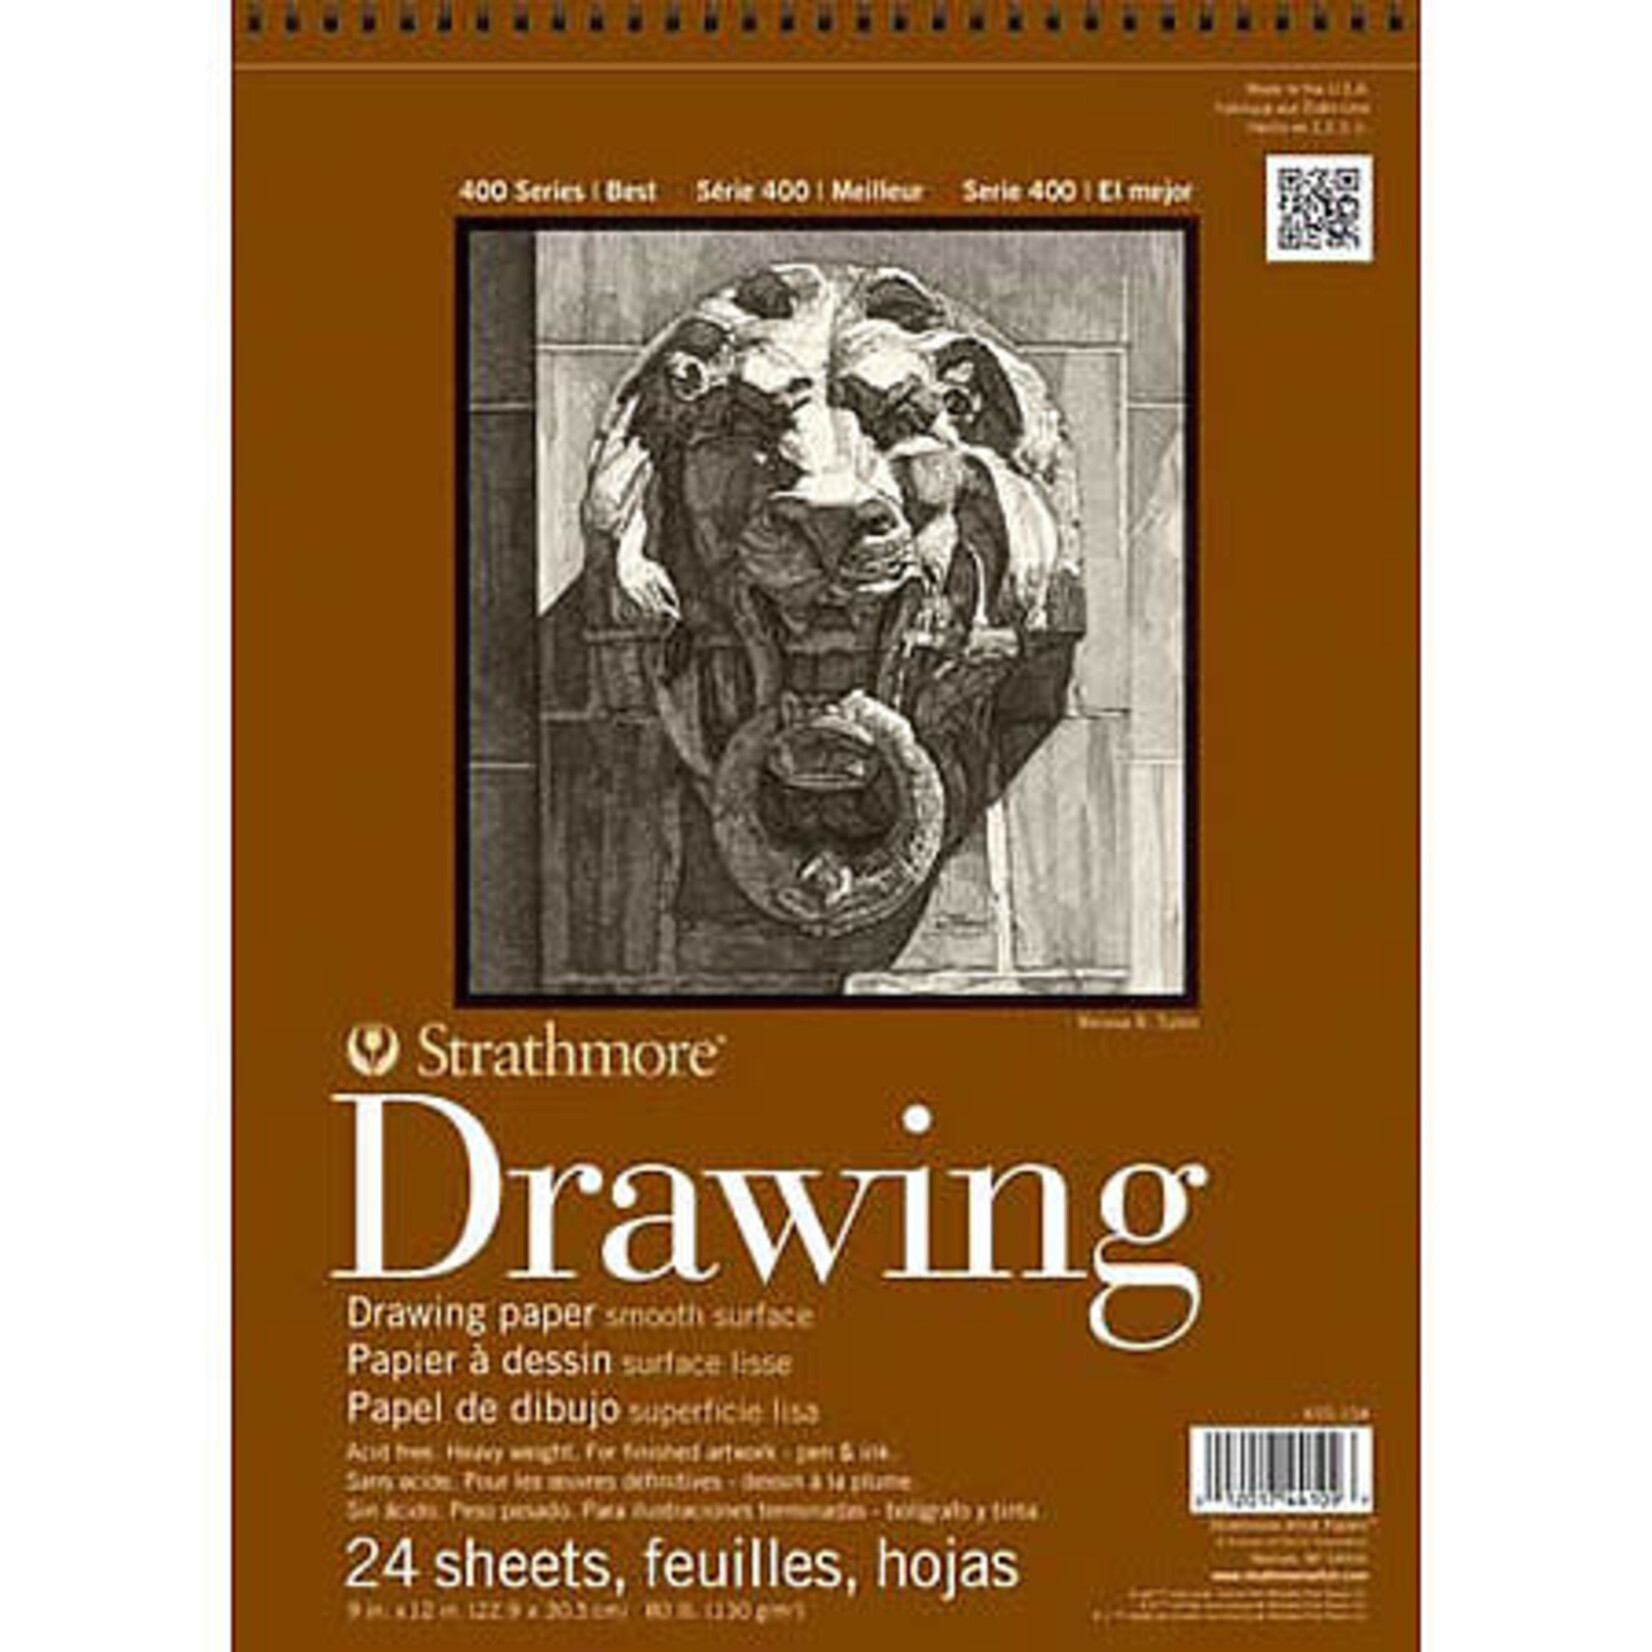 Strathmore Drawing  Pads 400 Series, Smooth Surface, 18 X 24